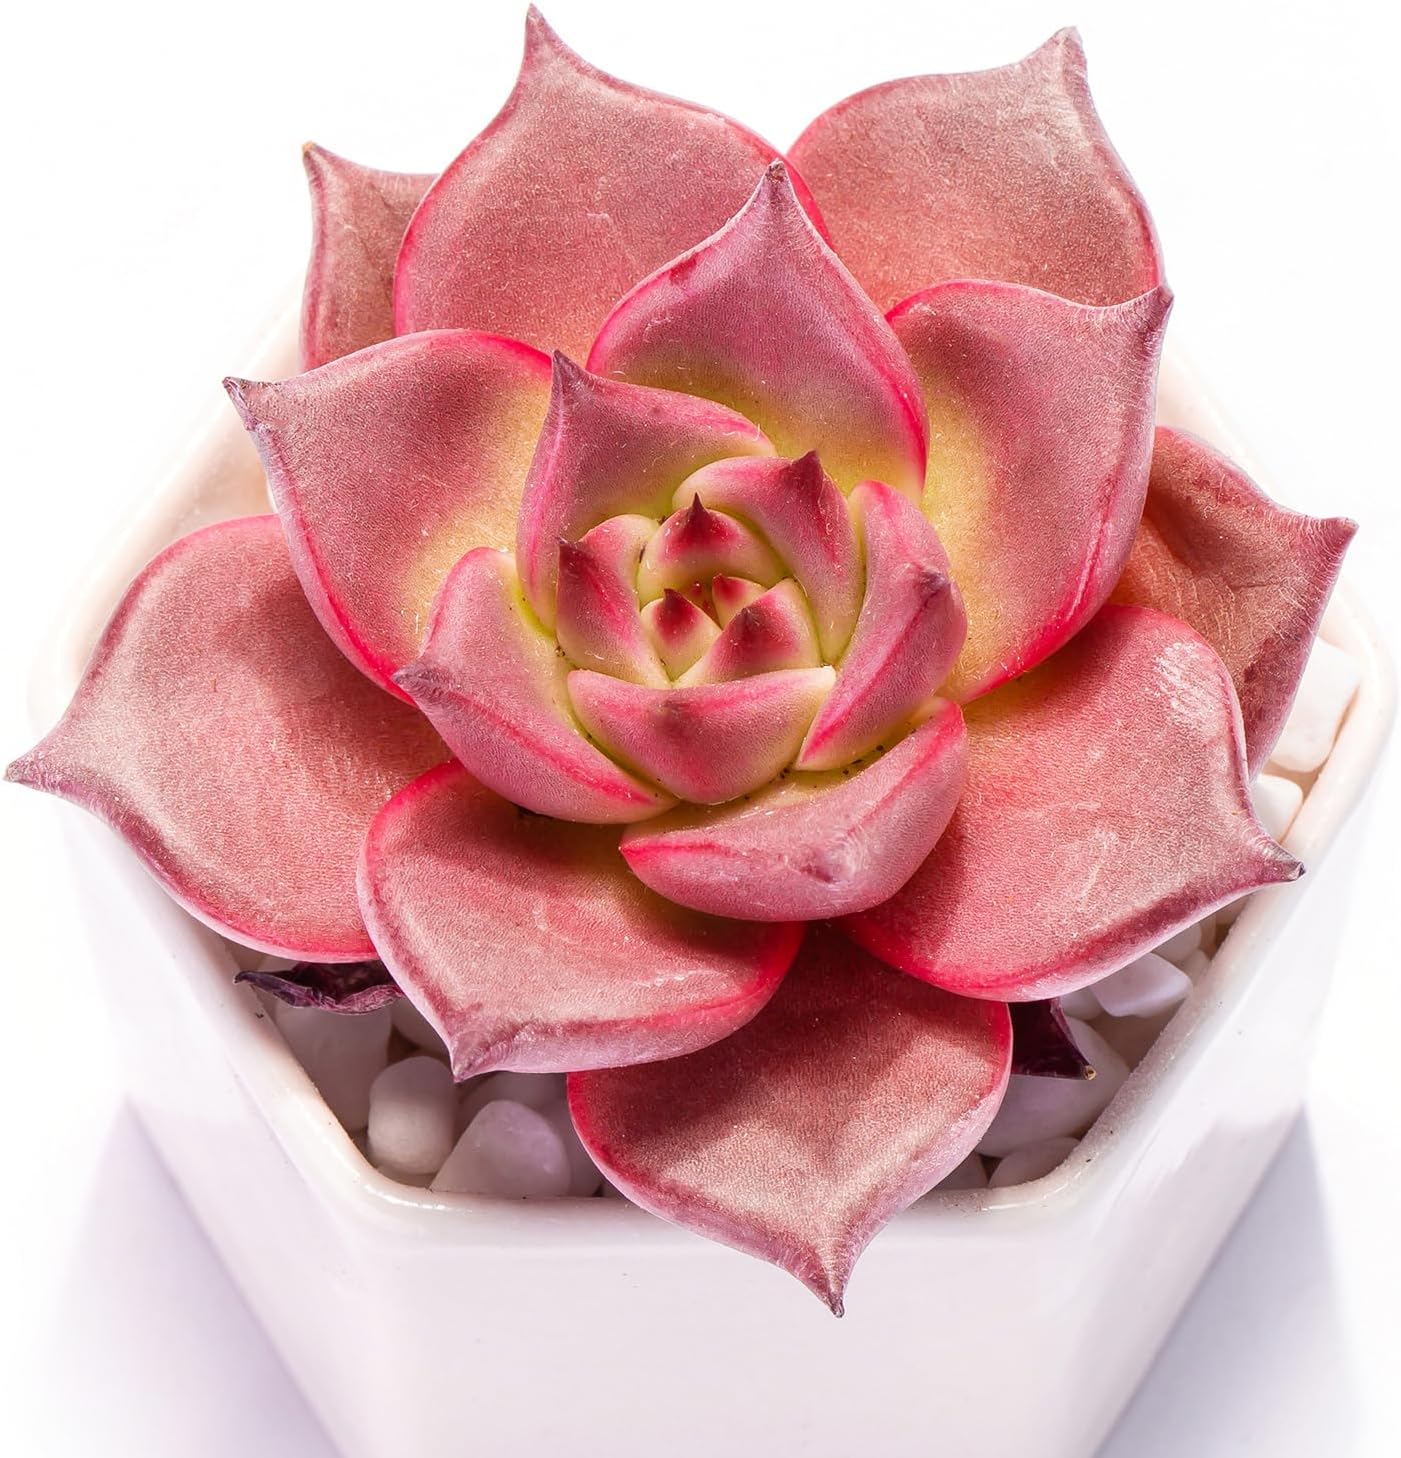 Echeveria Agavoides Romeo Rare Live Succulent Plants, Red 1 Head 2.7" Live Plant, Package Without Pot Soil, Garden Indoor Office Desk, Wedding Party Baby Shower Decoration, Friend Plant Lovers Gifts